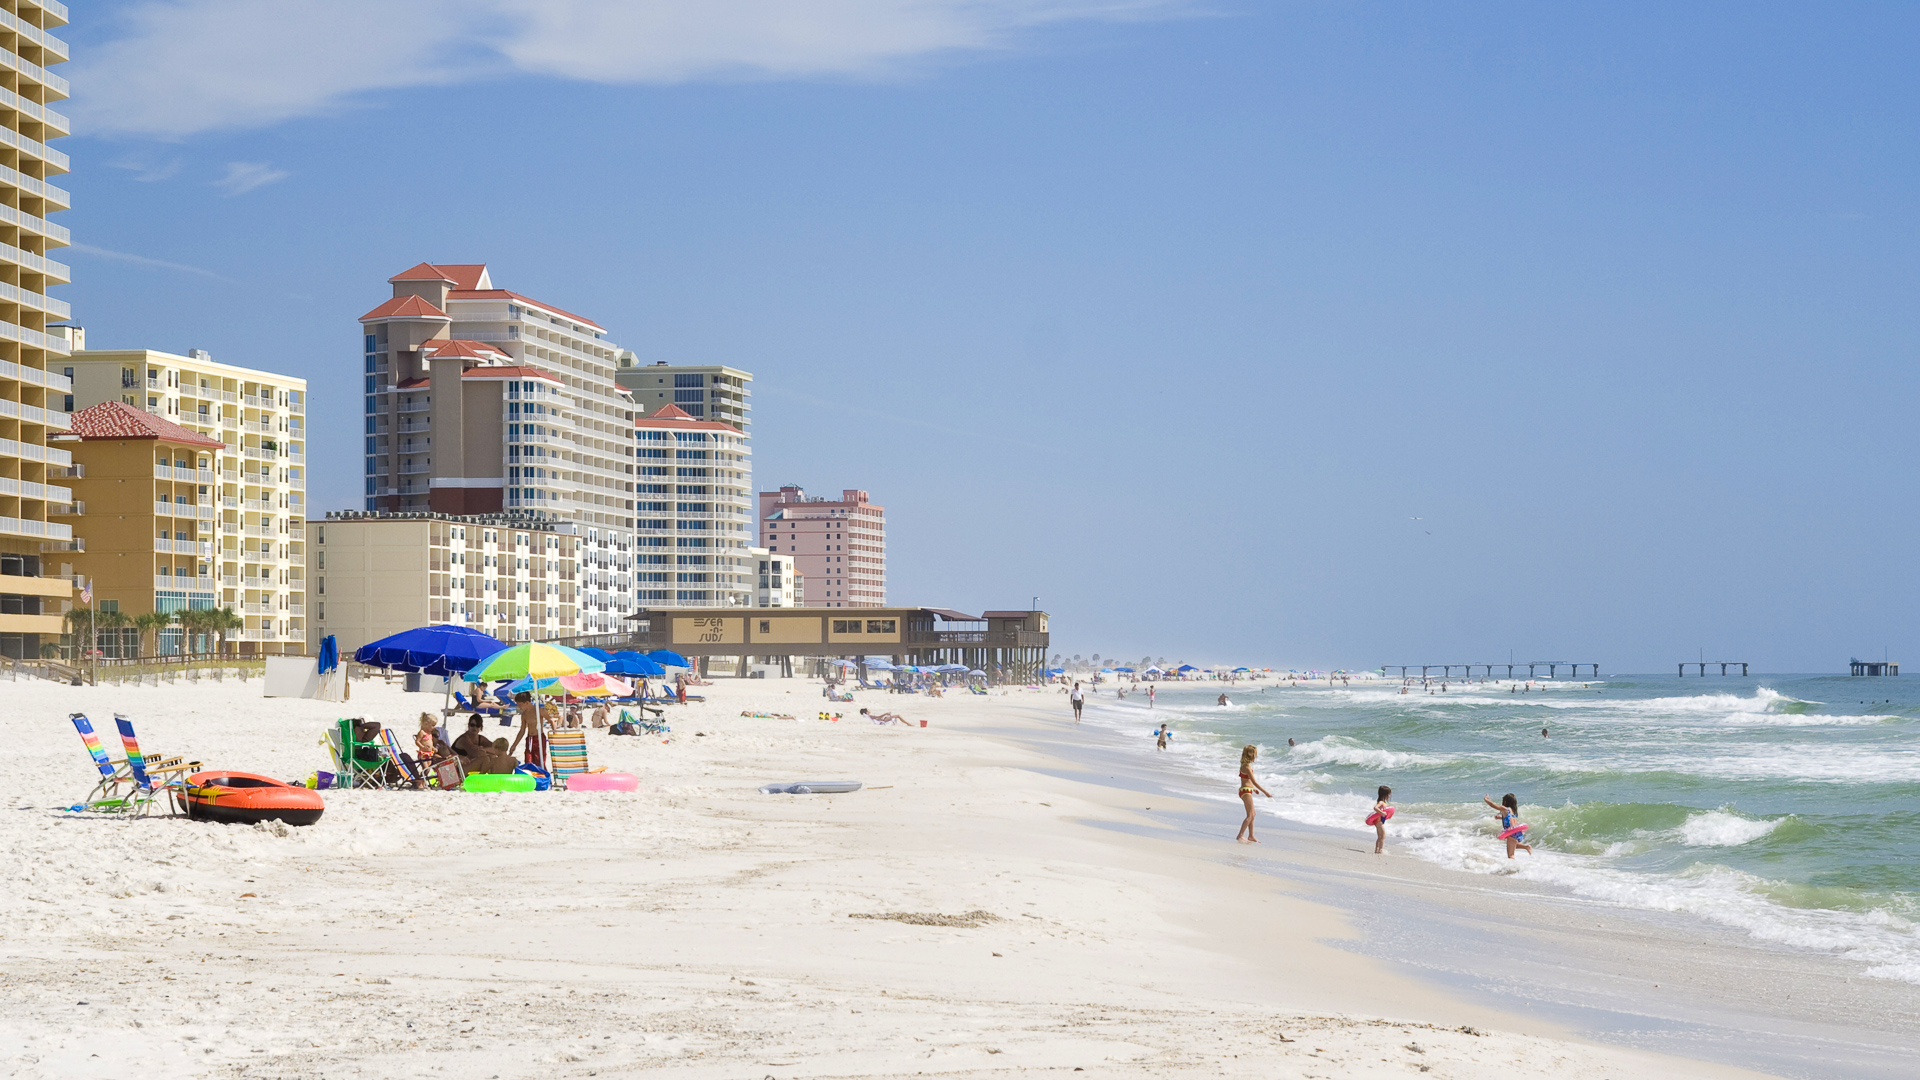 <p class="p2"><b>Lodging:</b> $300 for a three-night stay, or about $100 per night at Gulf Shores Surf & Racquet Club</p> <p class="p2"><b>Best time to visit:</b> Year-round, but November to December are ideal for those on a budget</p> <p class="p2">Filled with some of the nation's most pristine white-sand beaches, Gulf Shores is also a haven for shoppers, golfers, and anyone who likes being on the water.</p> <p class="p2">Fishing, diving and dolphin cruises are popular, as are exploring Gulf State Park via Segway, or going on a hike the old-fashioned way. Whether lounging on the beach or heading out into nature or on the town, this place has plenty to offer.</p>